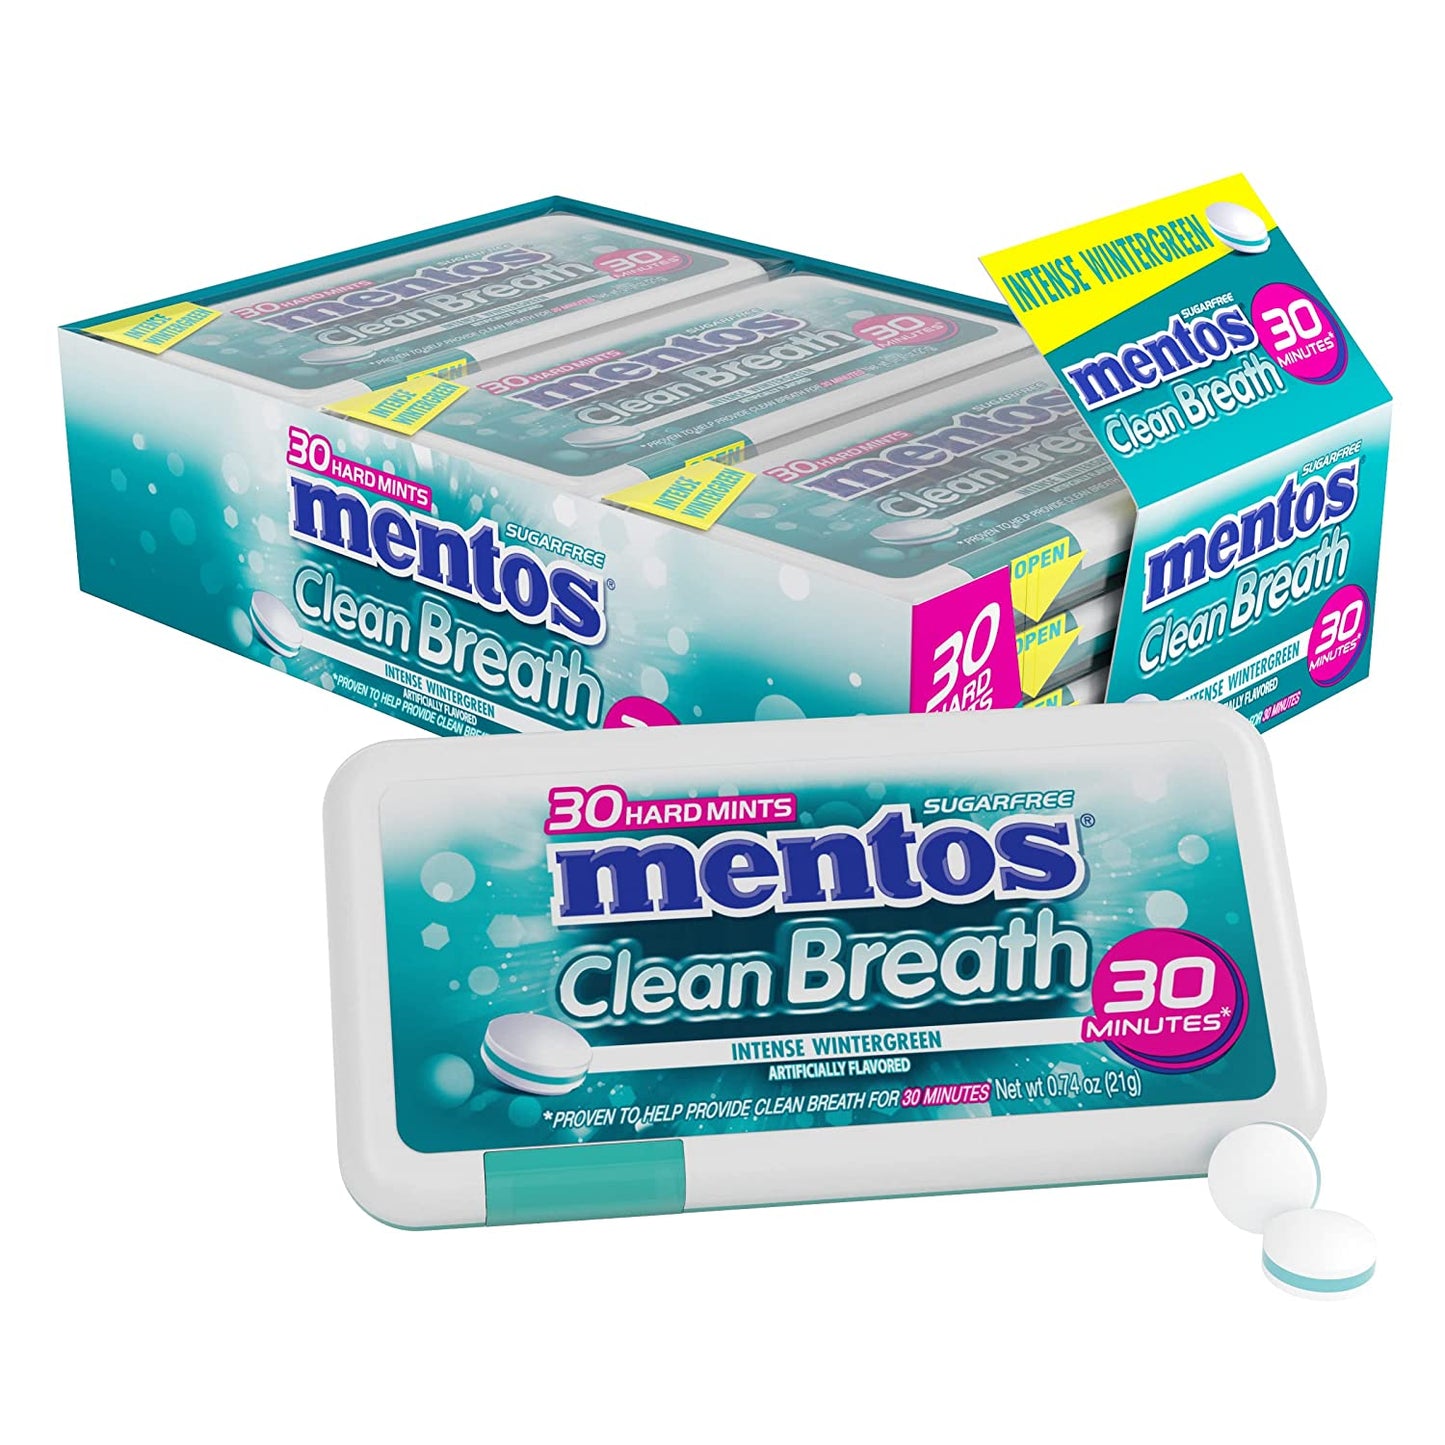 Mentos Clean Breath Hard Mints Sugar Free Candy, Wintergreen, (Pack of 12)